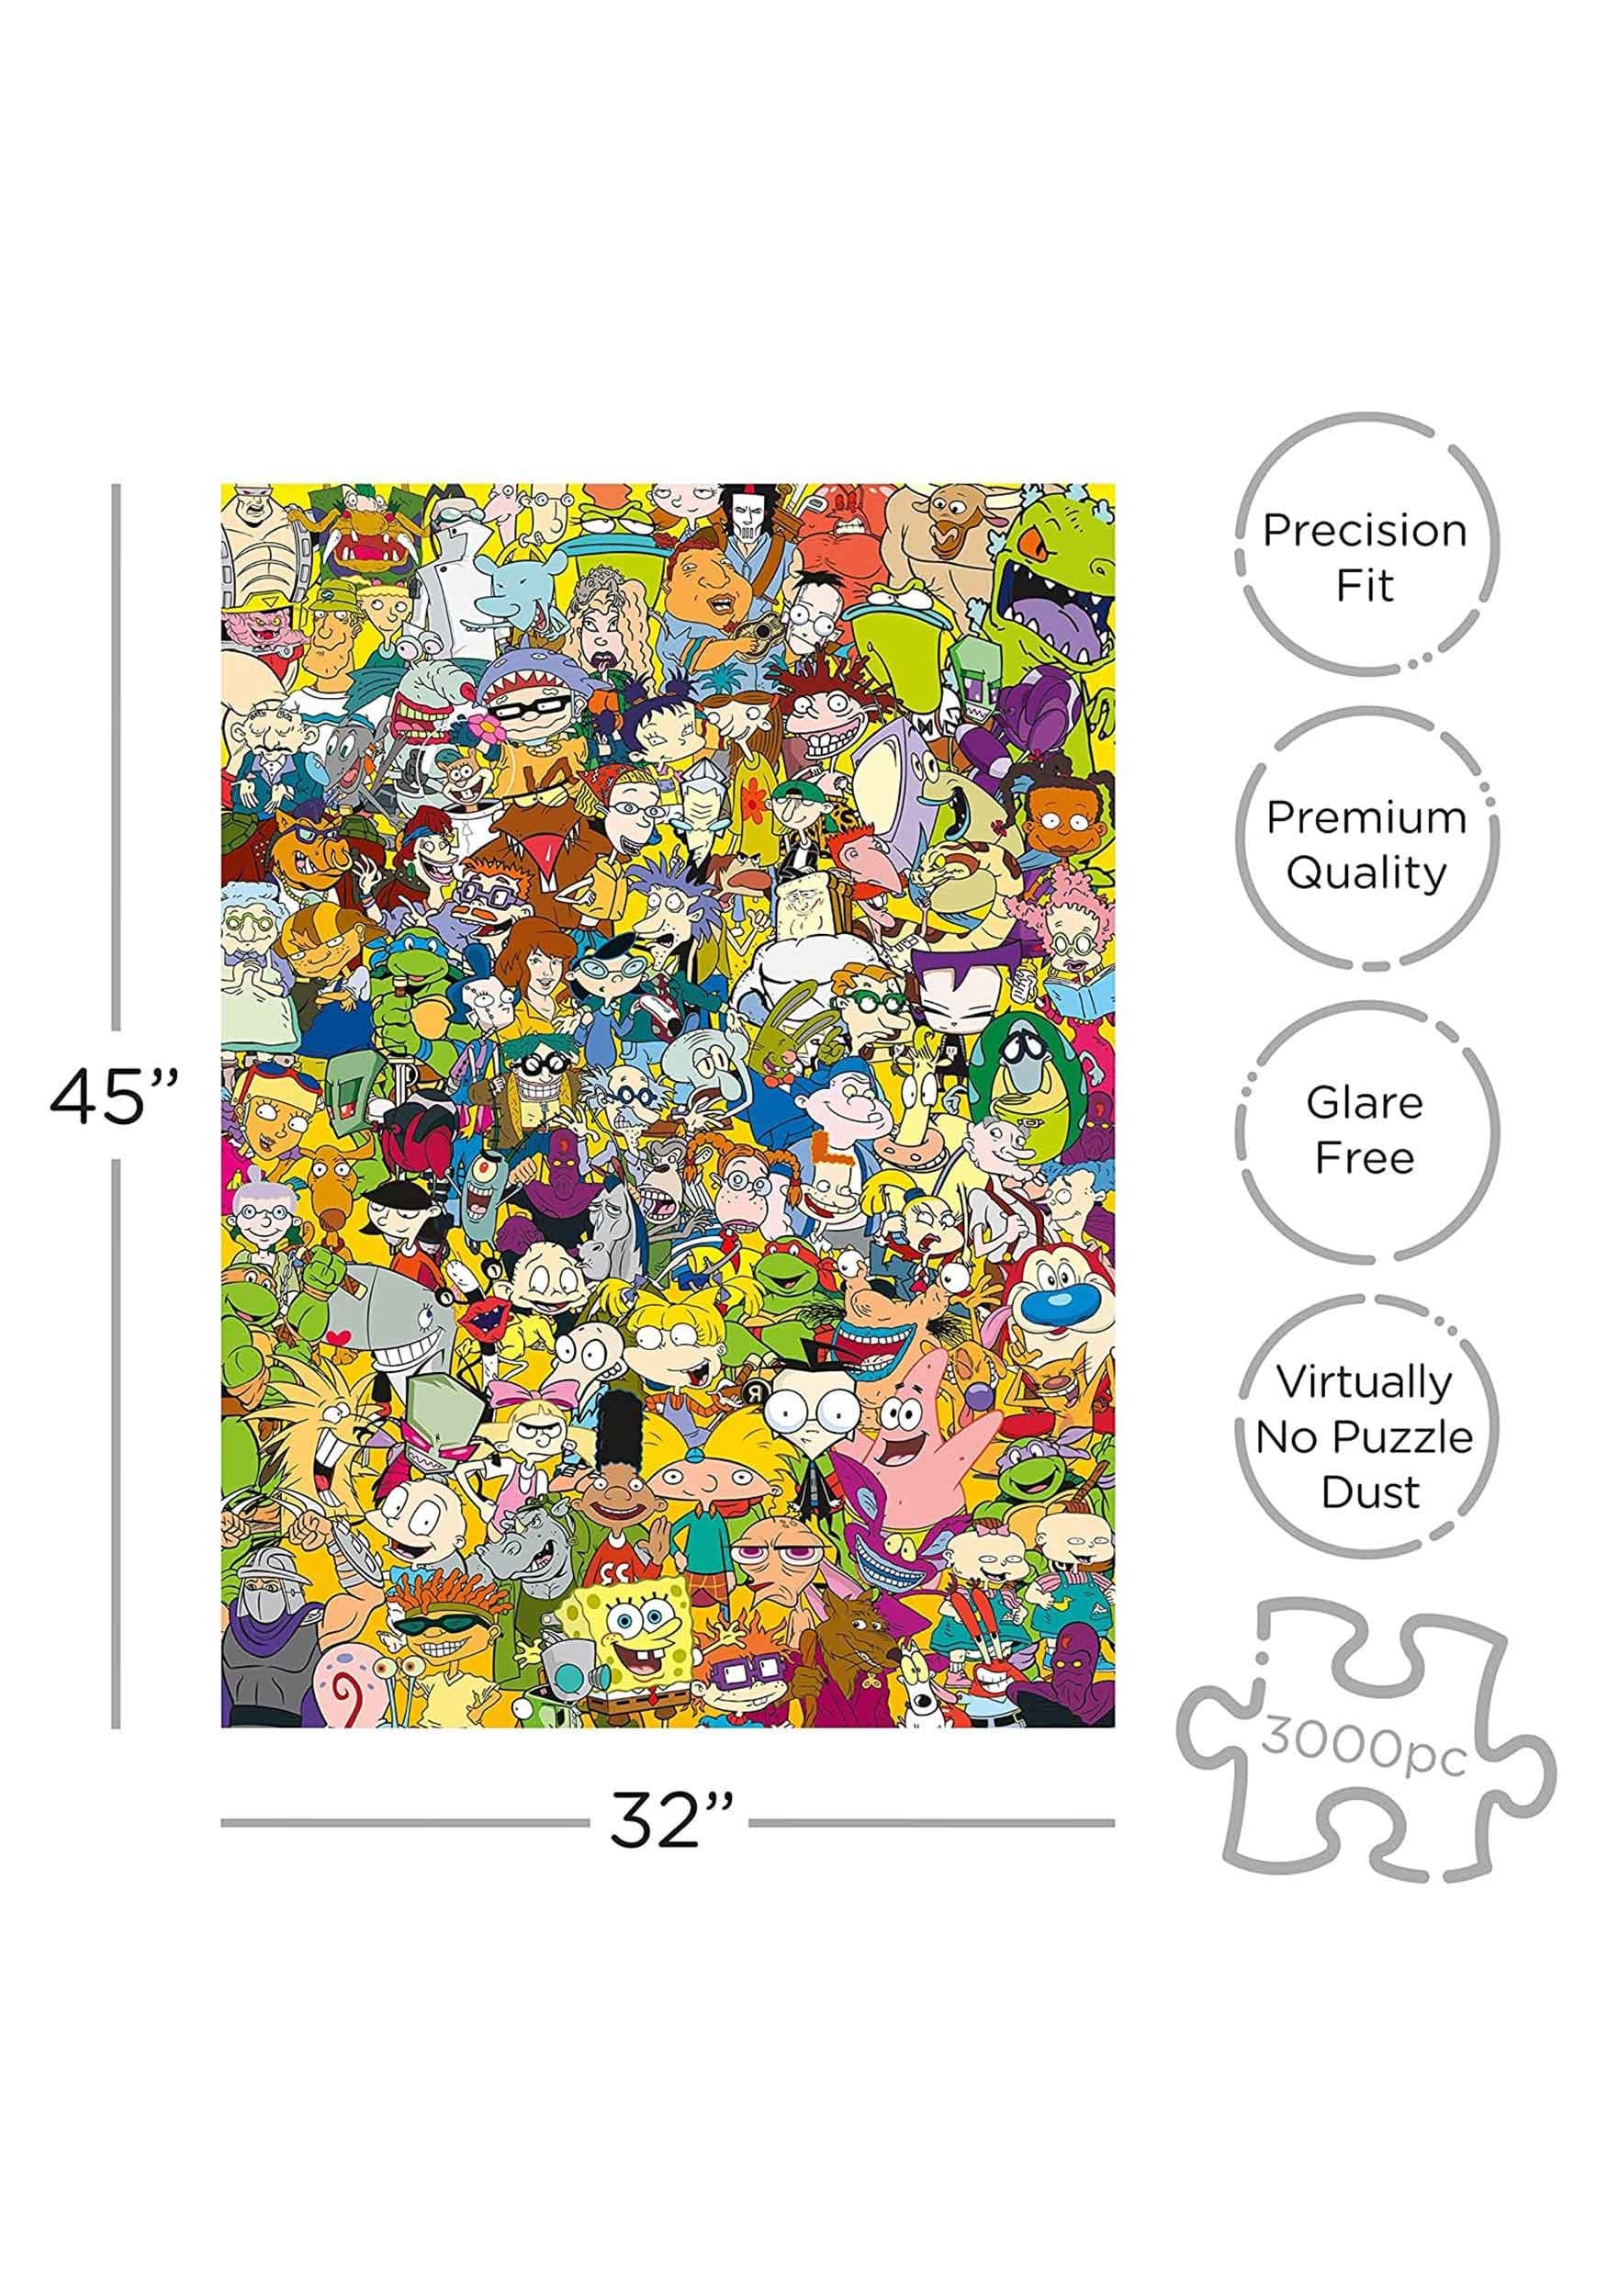 Aquarius Friends Puzzle (3000 Piece Jigsaw Puzzle) - Officially Licensed  Friends TV Show Merchandise & Collectibles - Glare Free - Precision Fit -  32